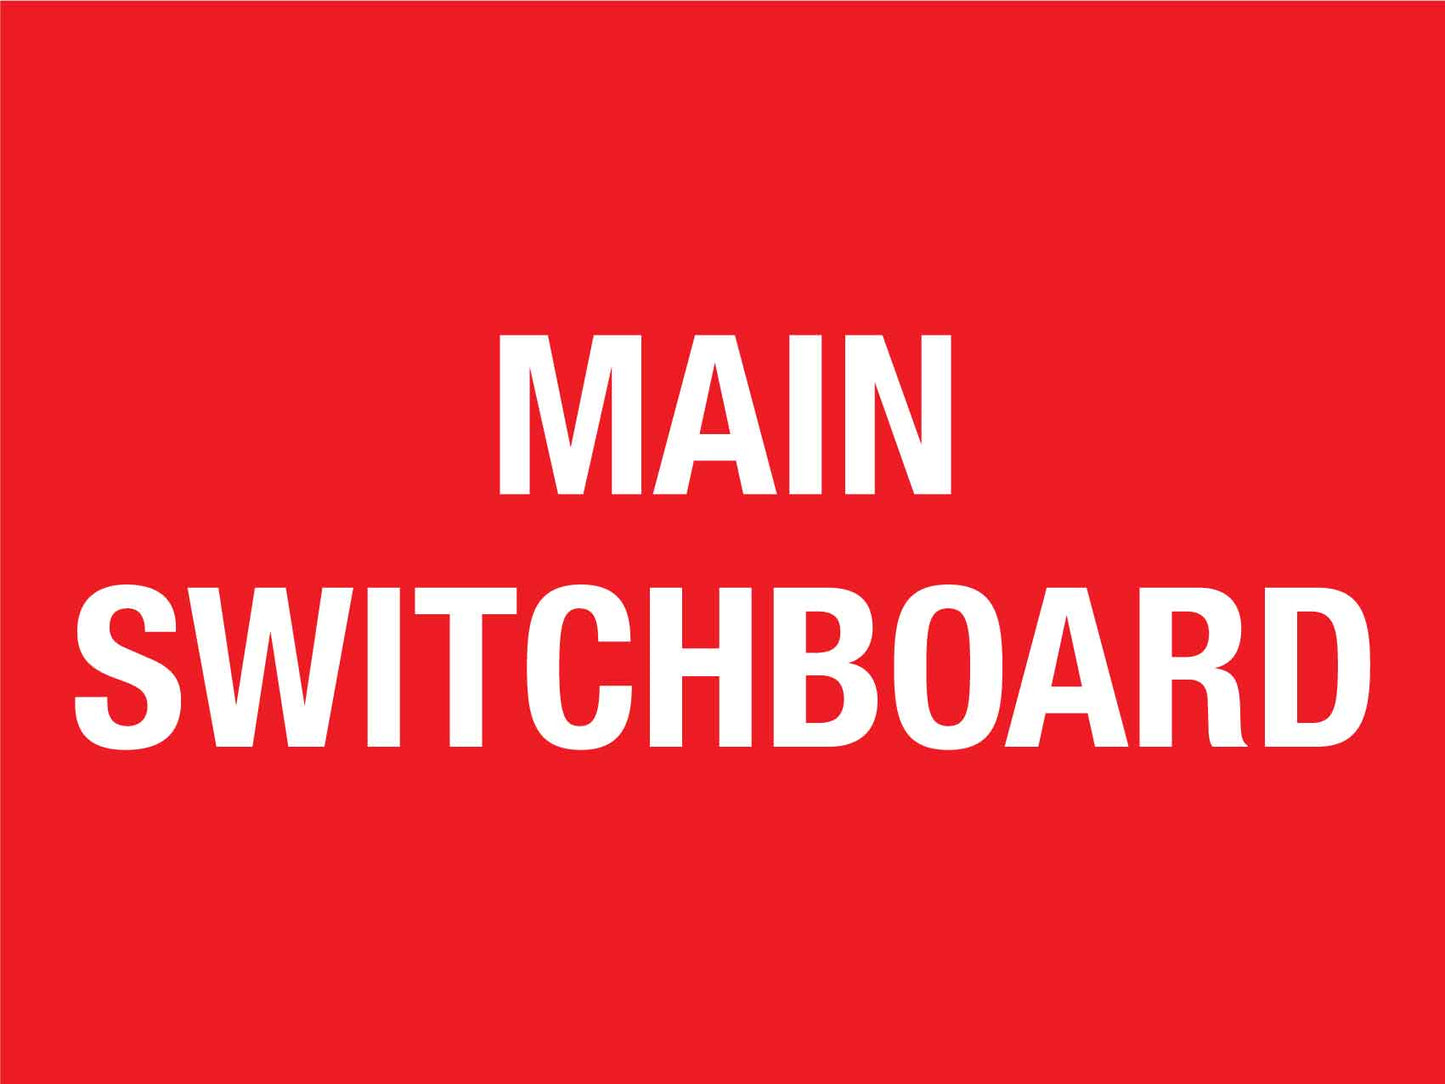 Main Switchboard Sign